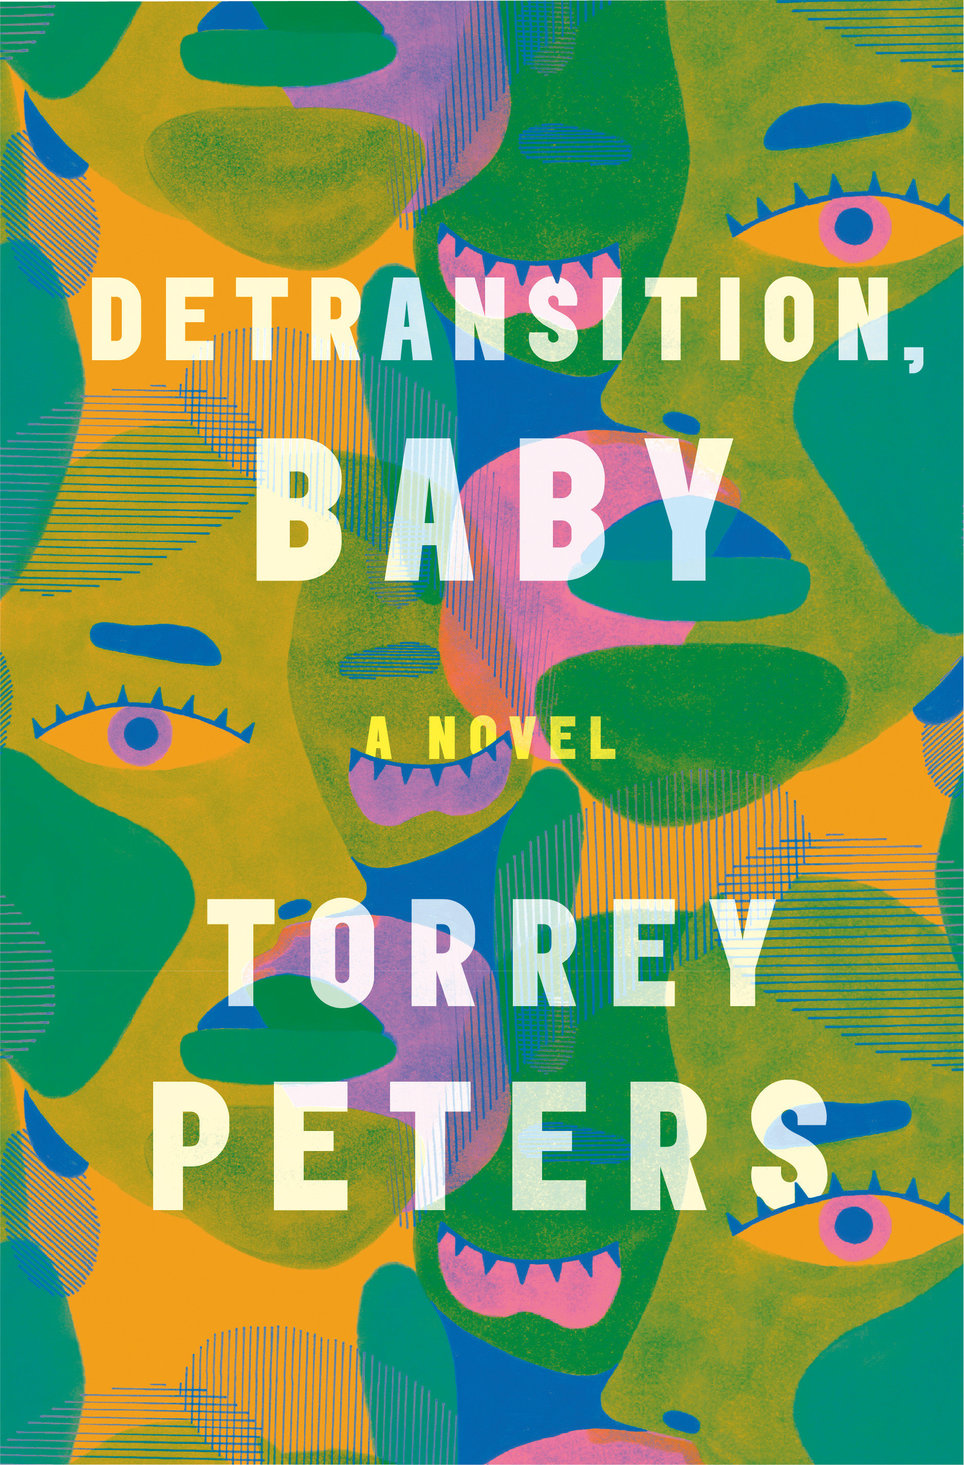 book review detransition baby